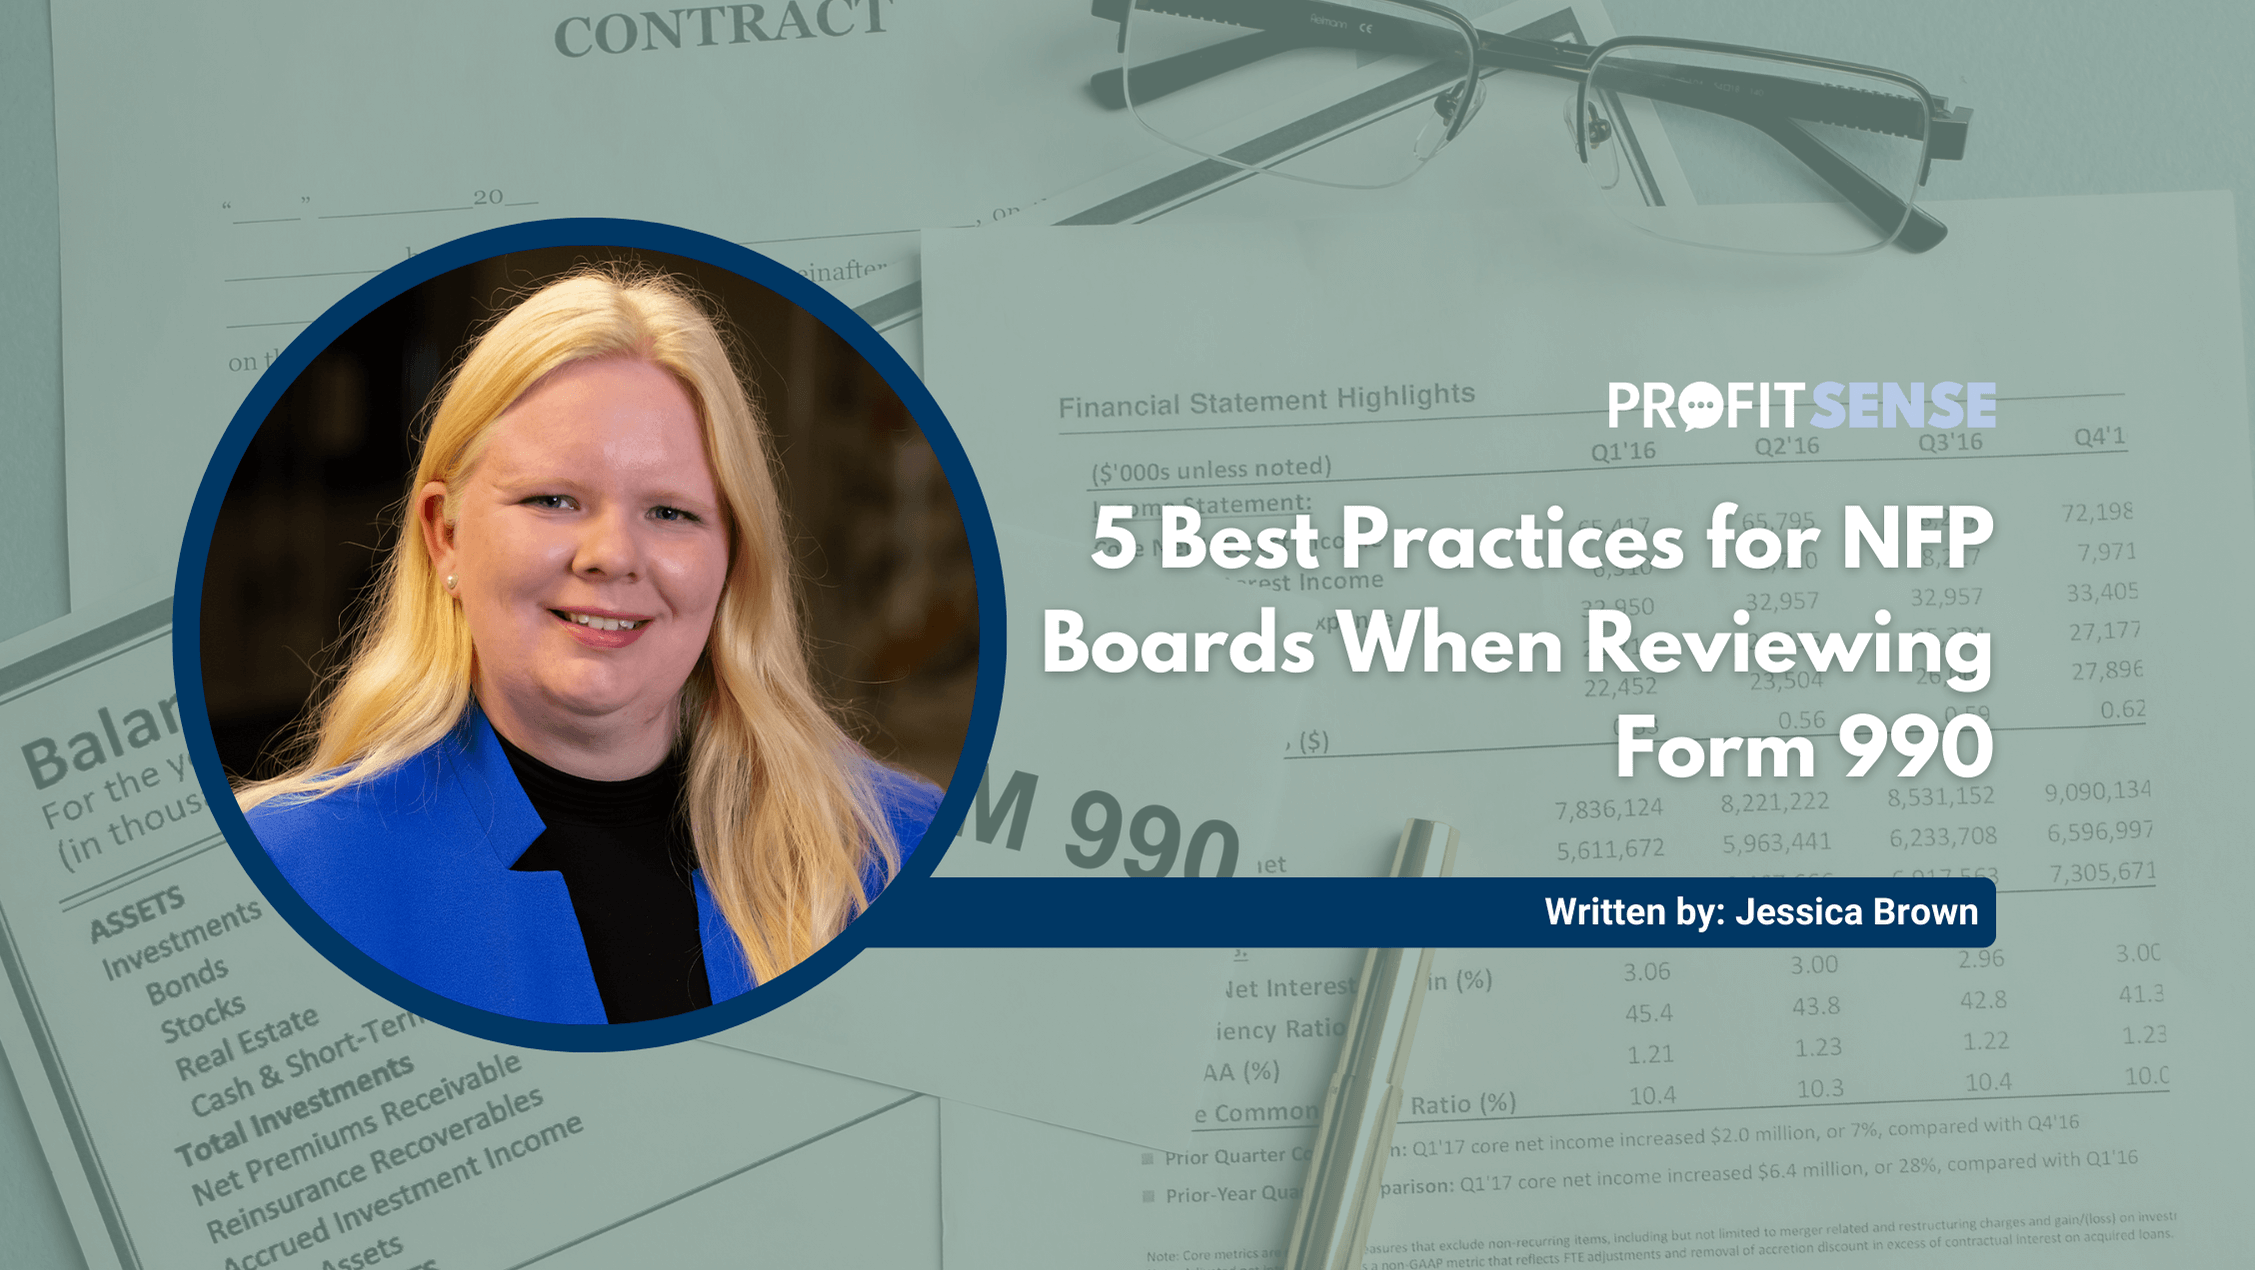 5 Best Practices for NFP Boards When Reviewing Form 990